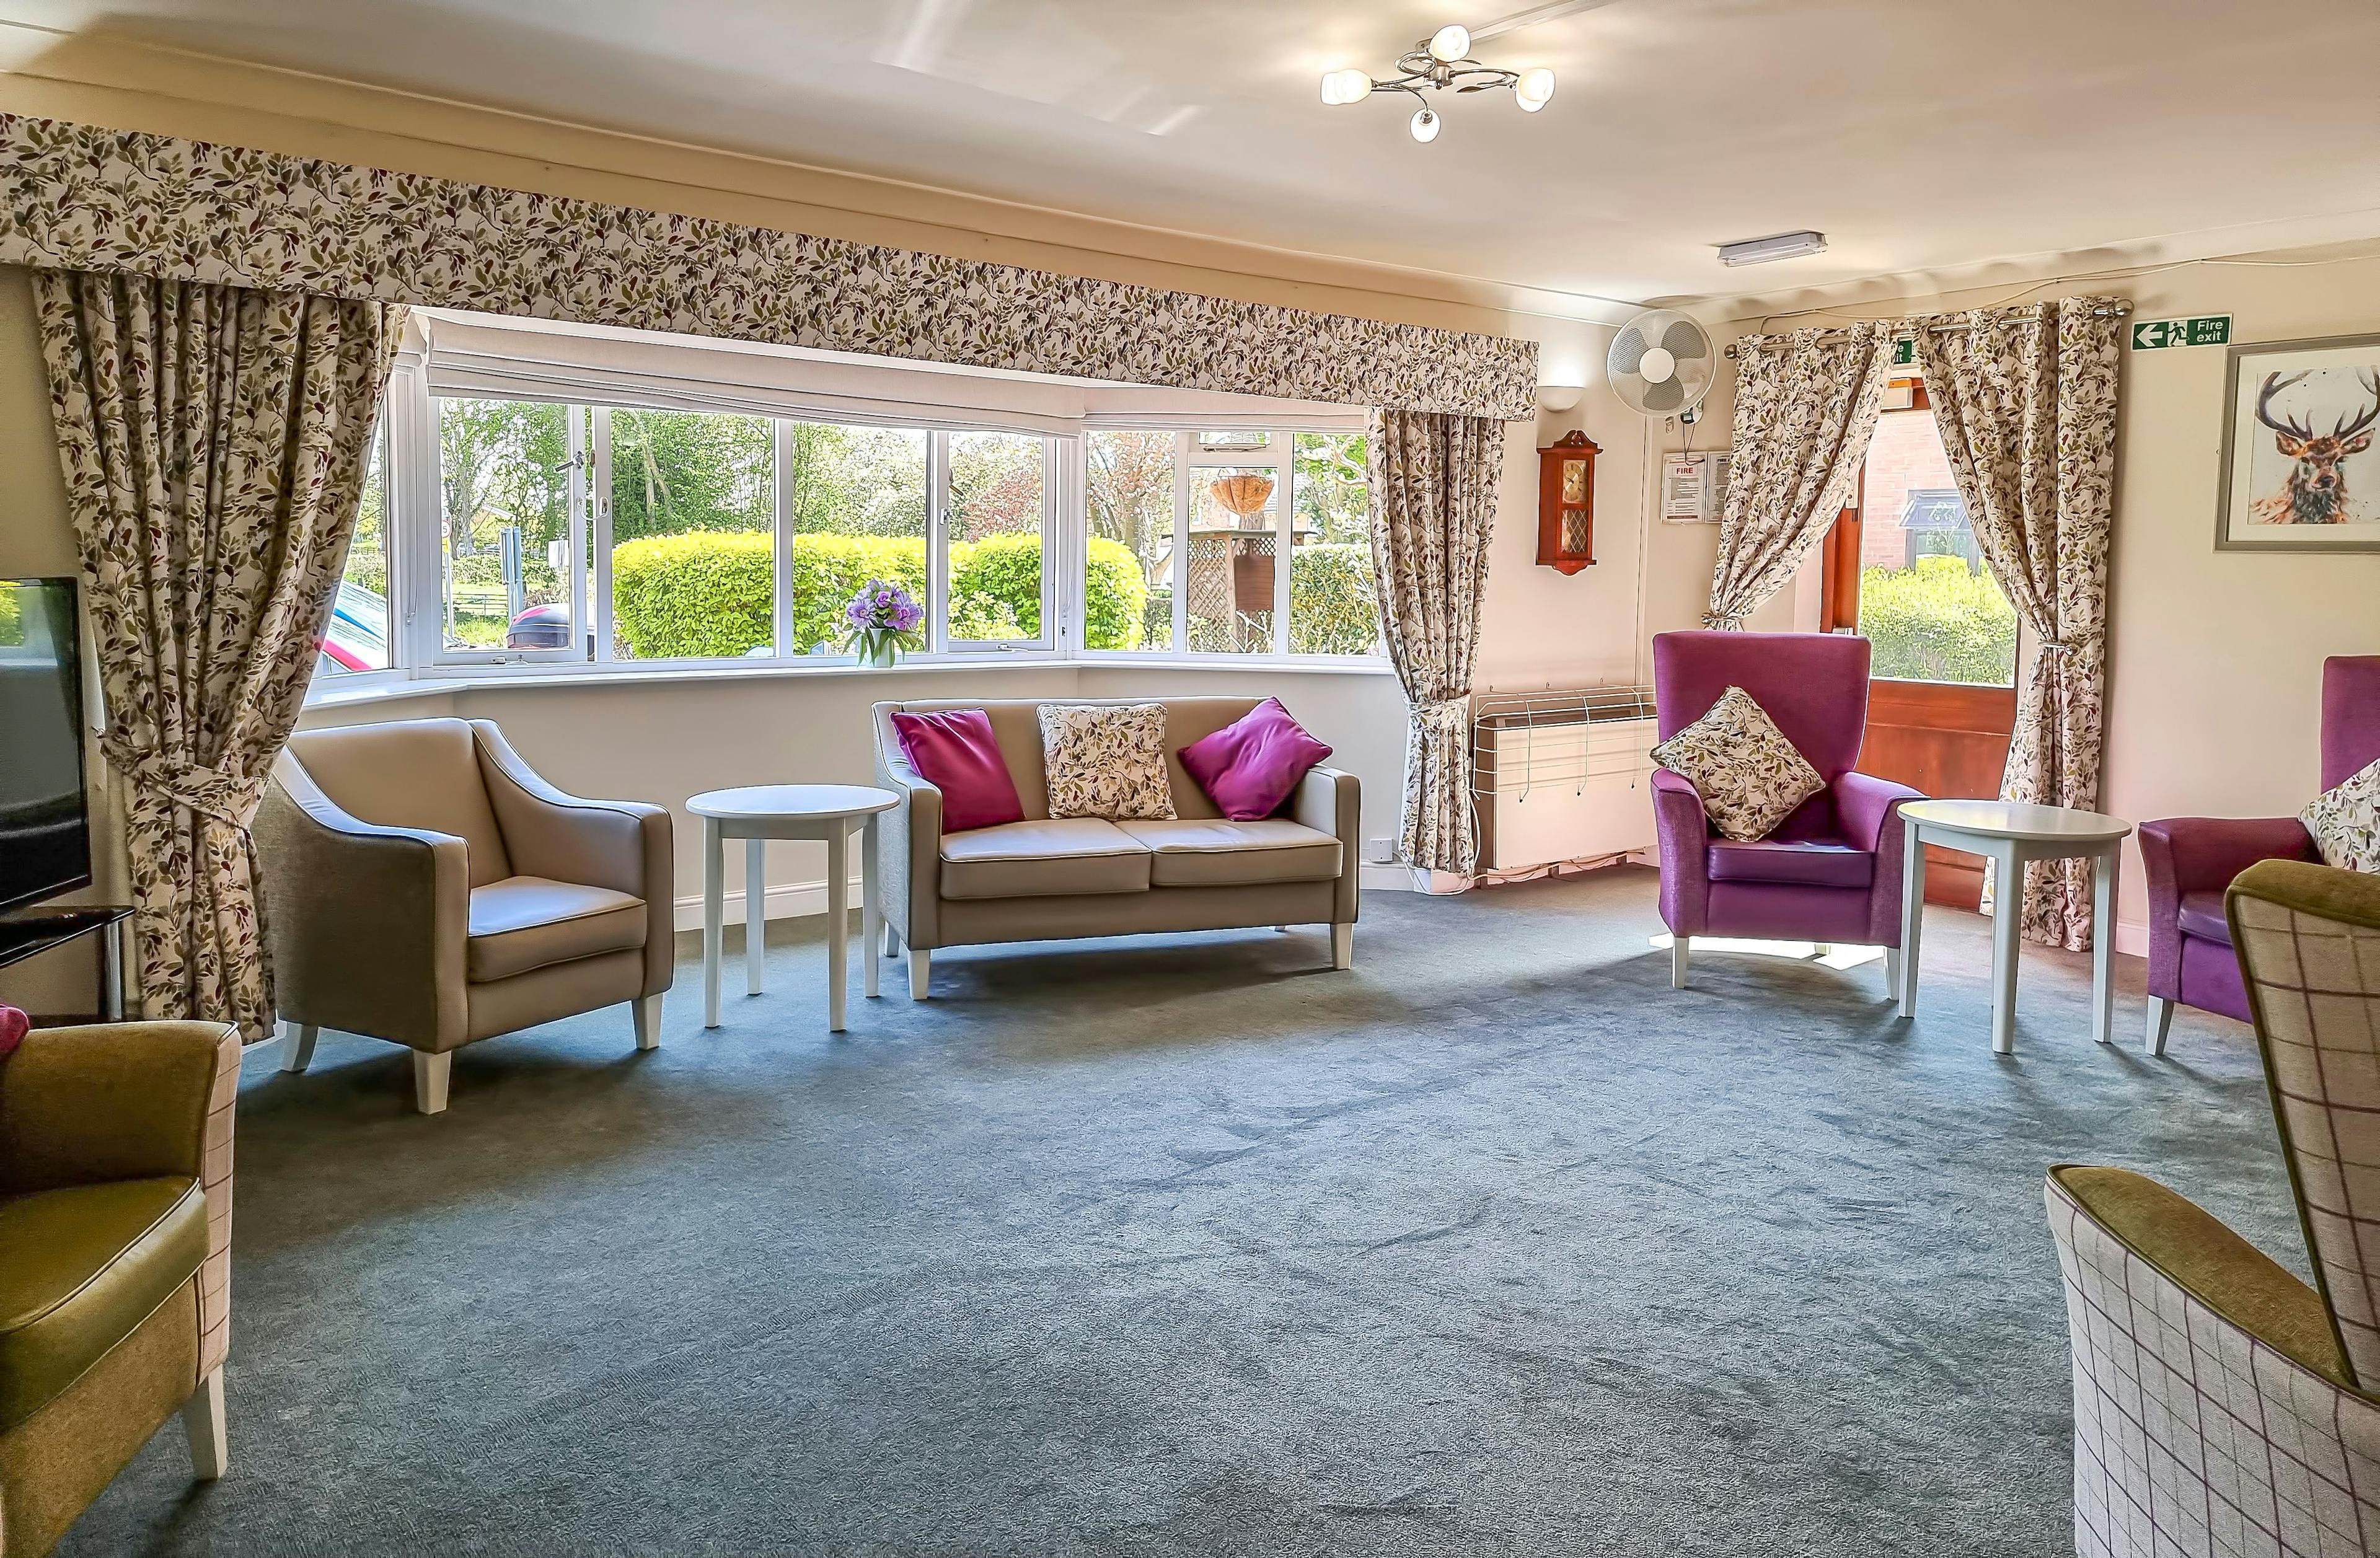 Buckland Care - Willow Bank House care home 4